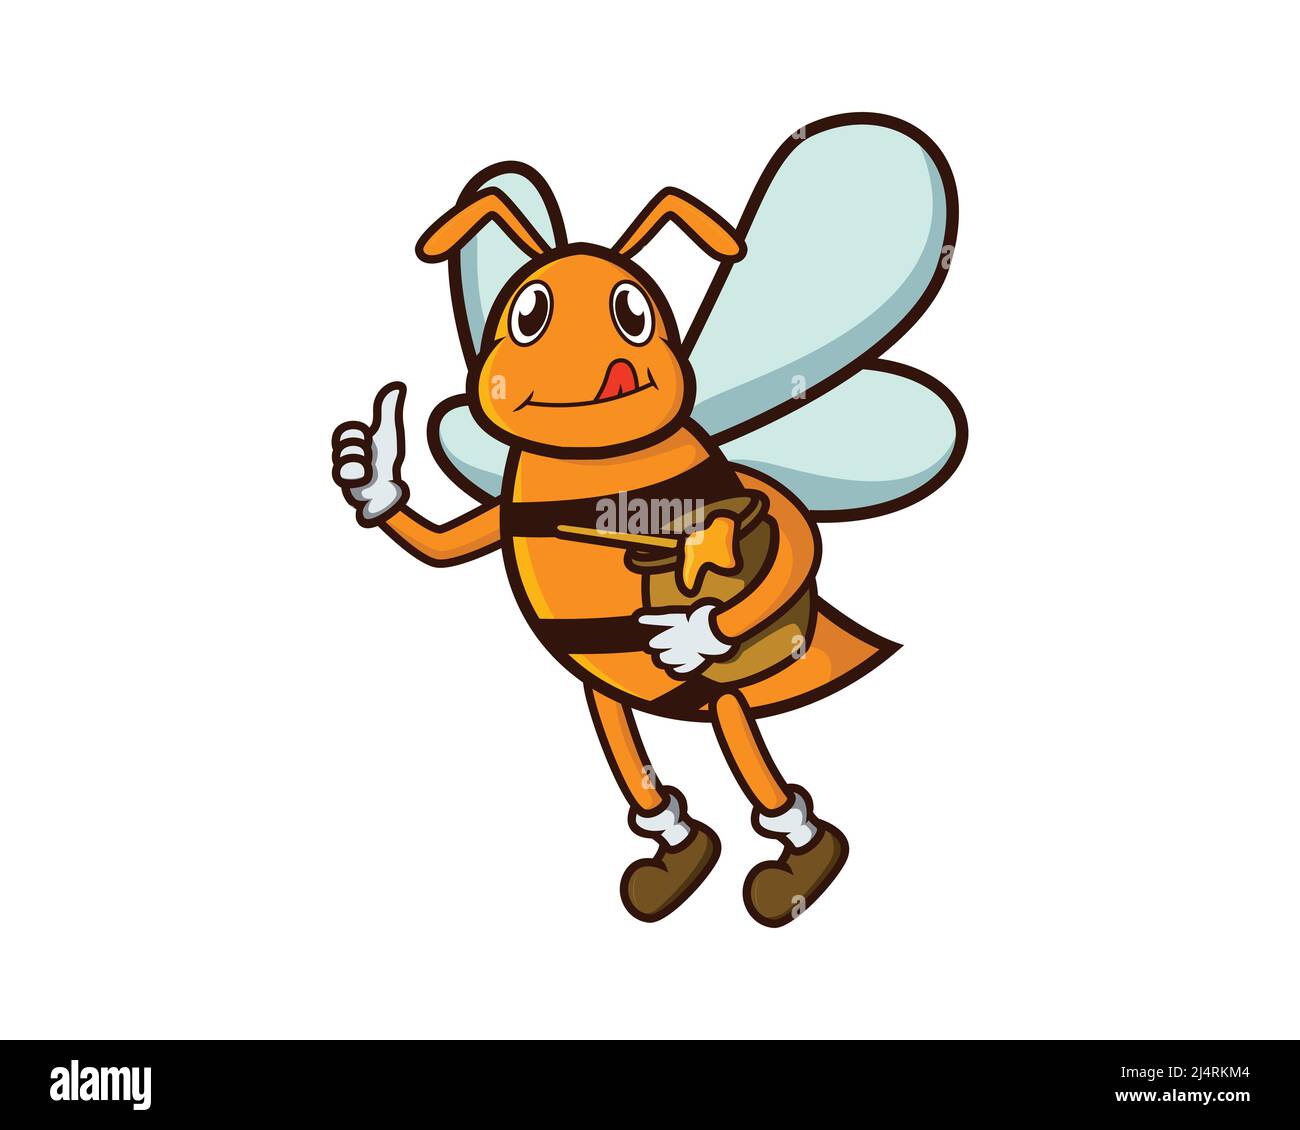 Bee Holding Honey Illustration with Cartoon Style Vector Stock Vector